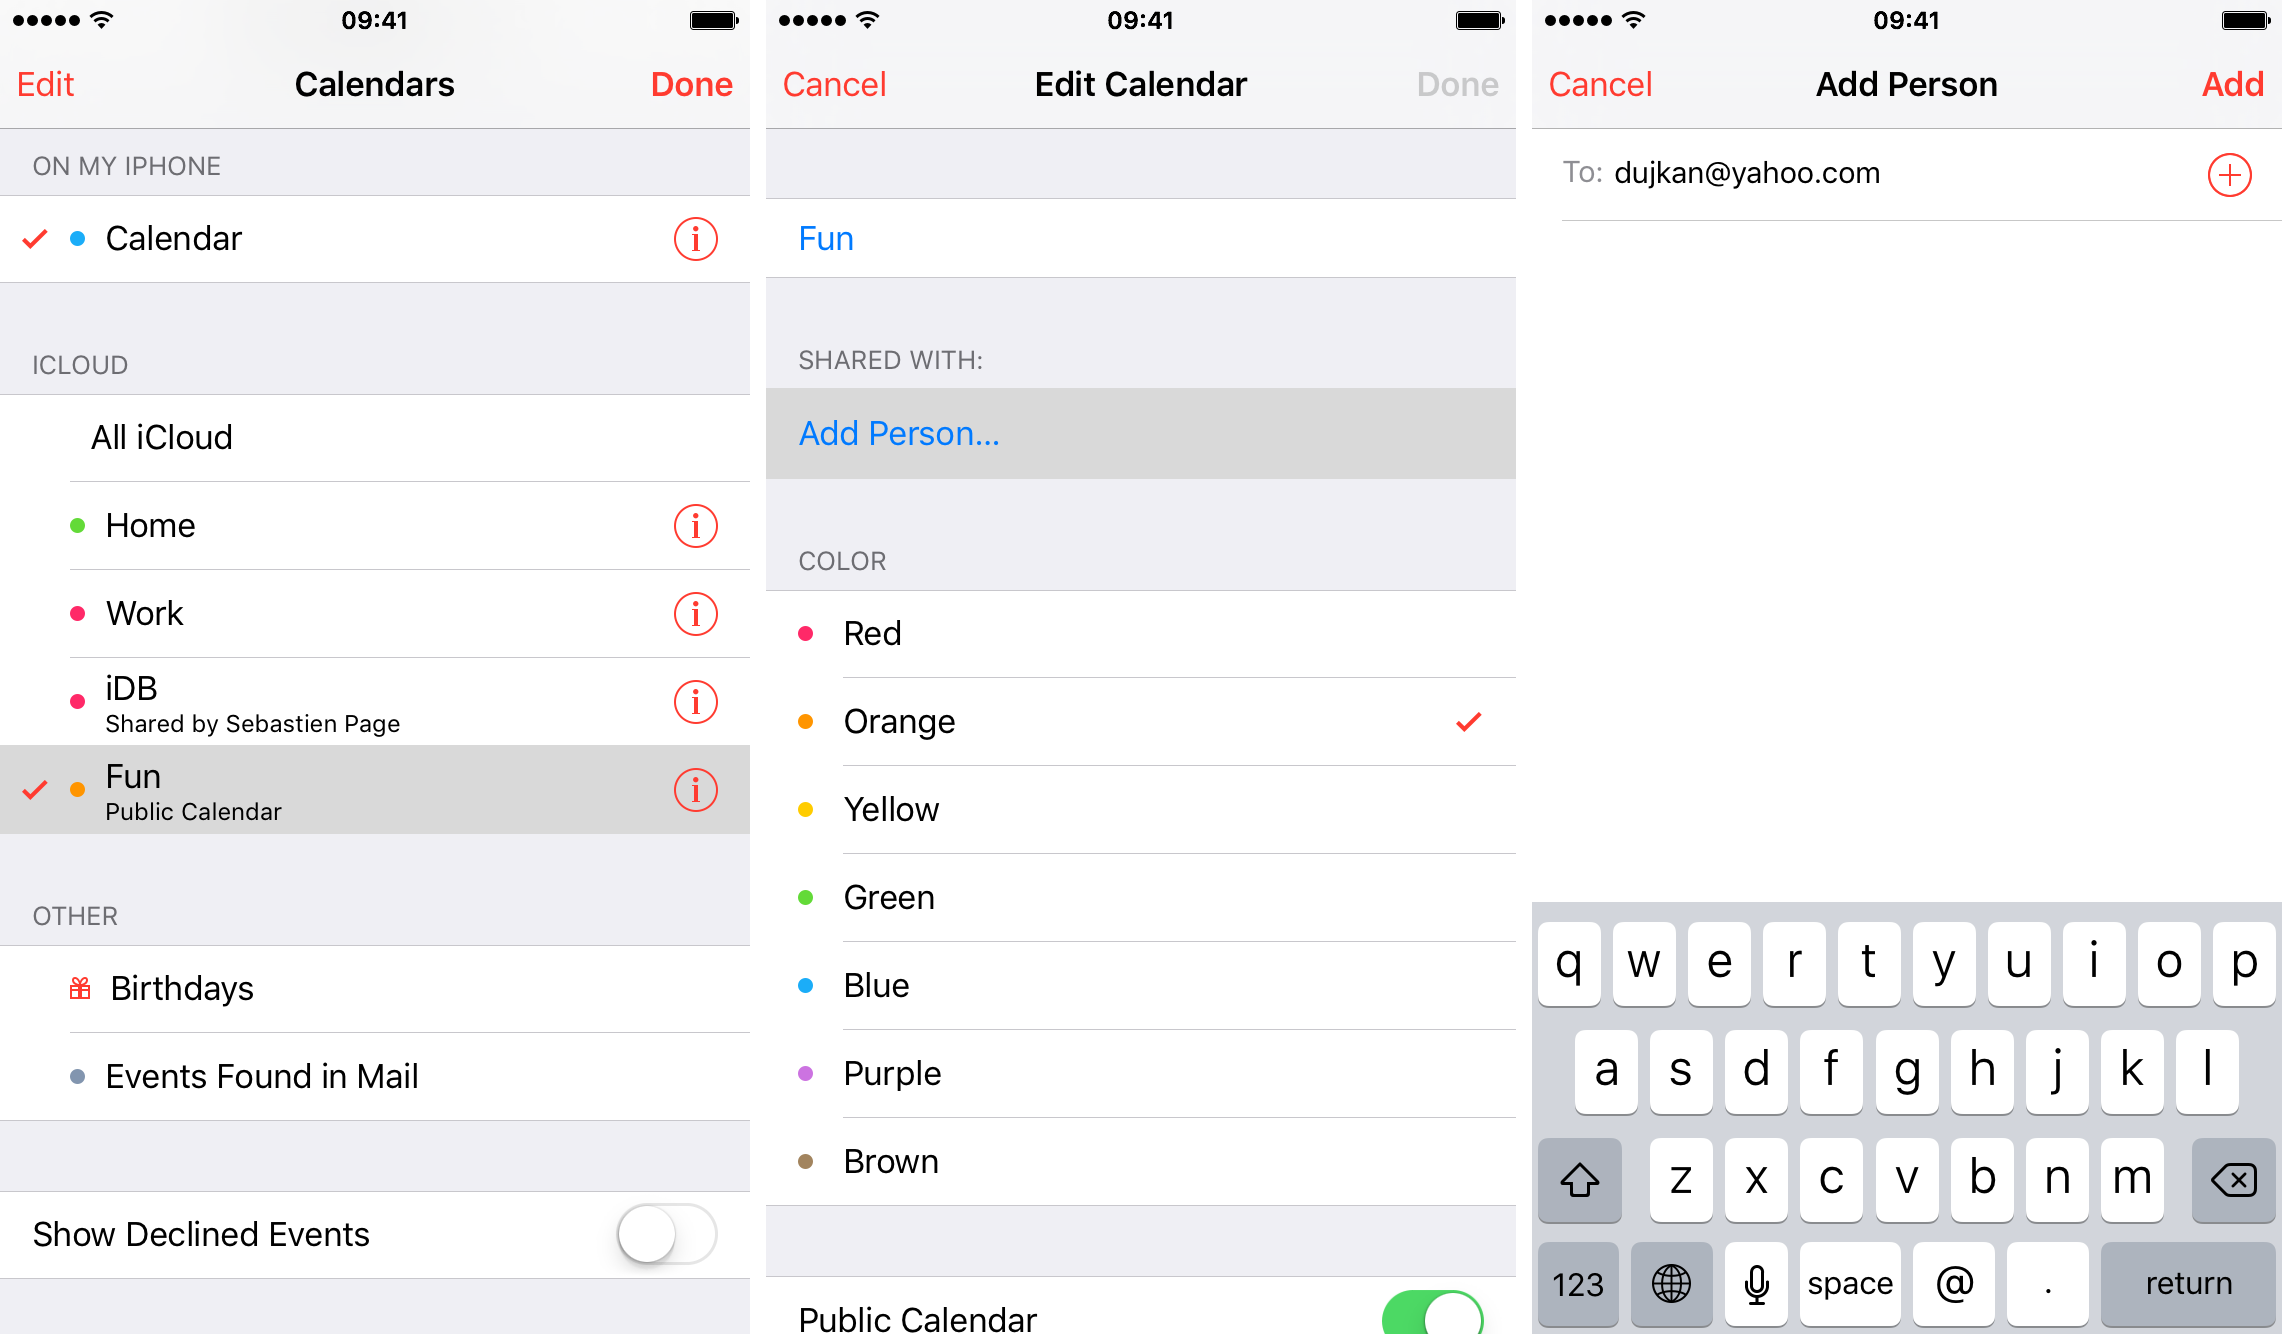 Choose person to share iCloud calendars with